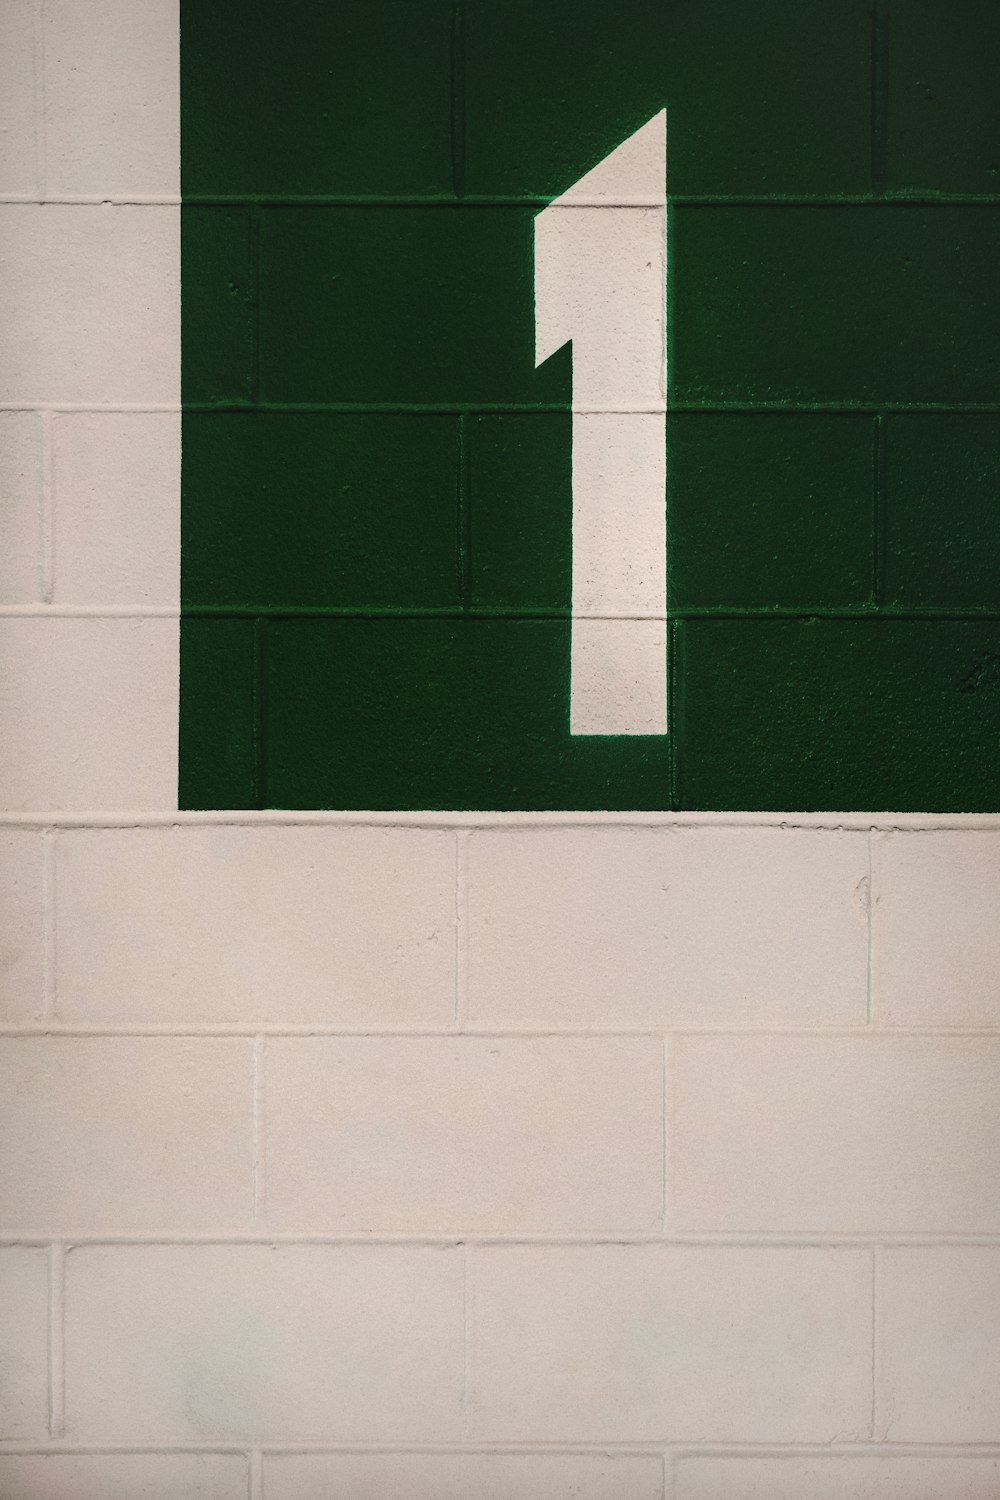 a green and white sign on a brick wall